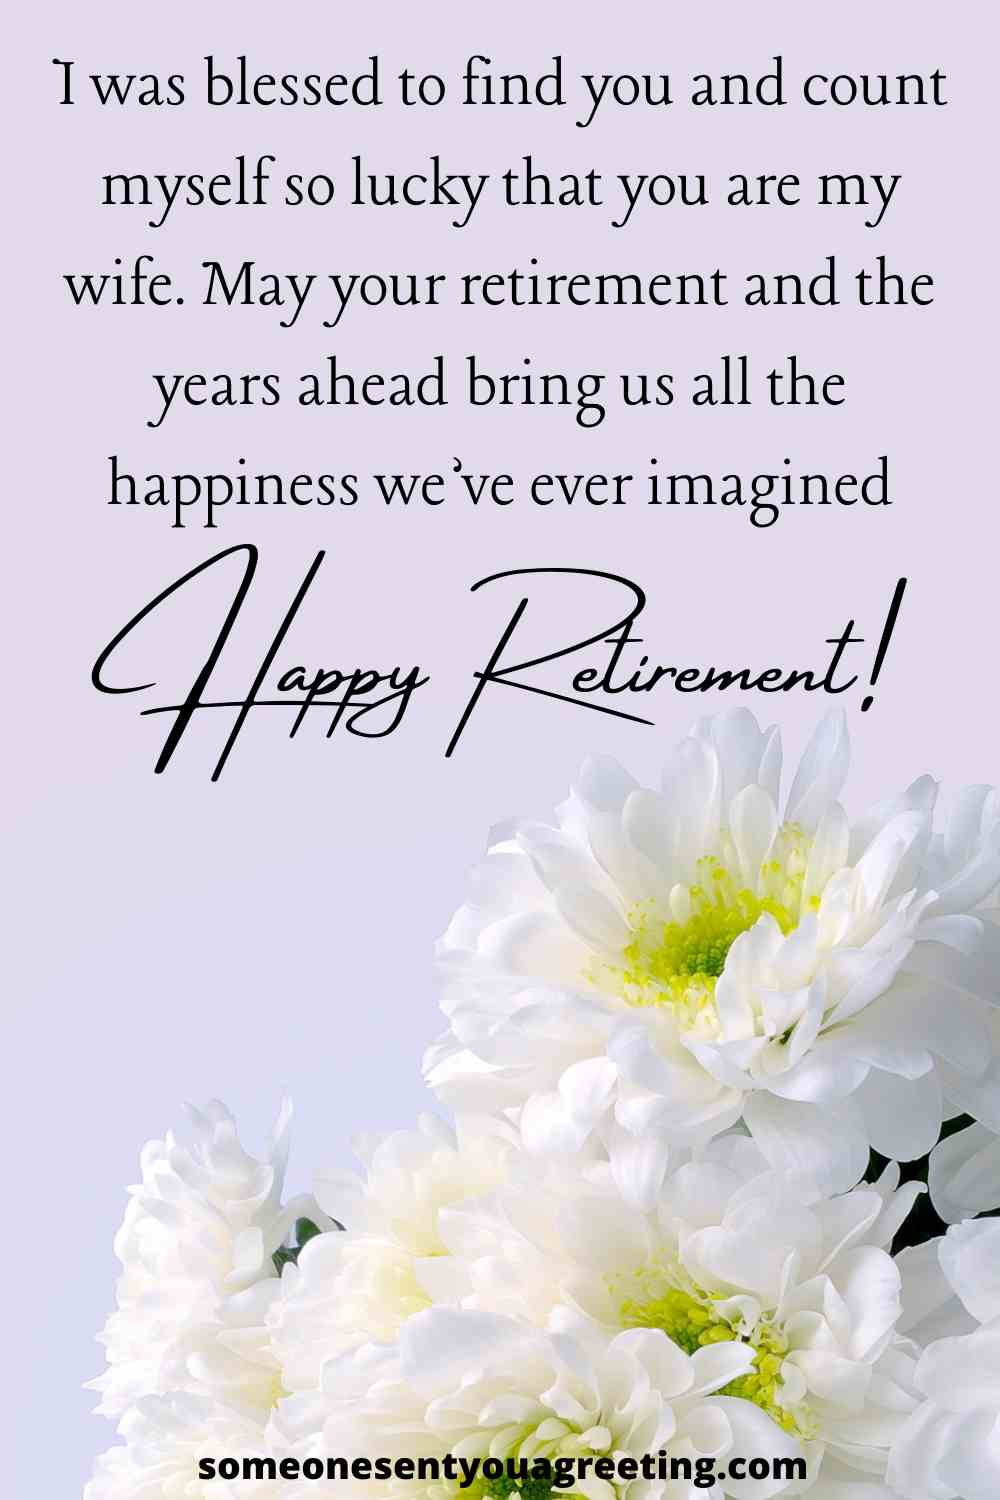 Retirement message for wife